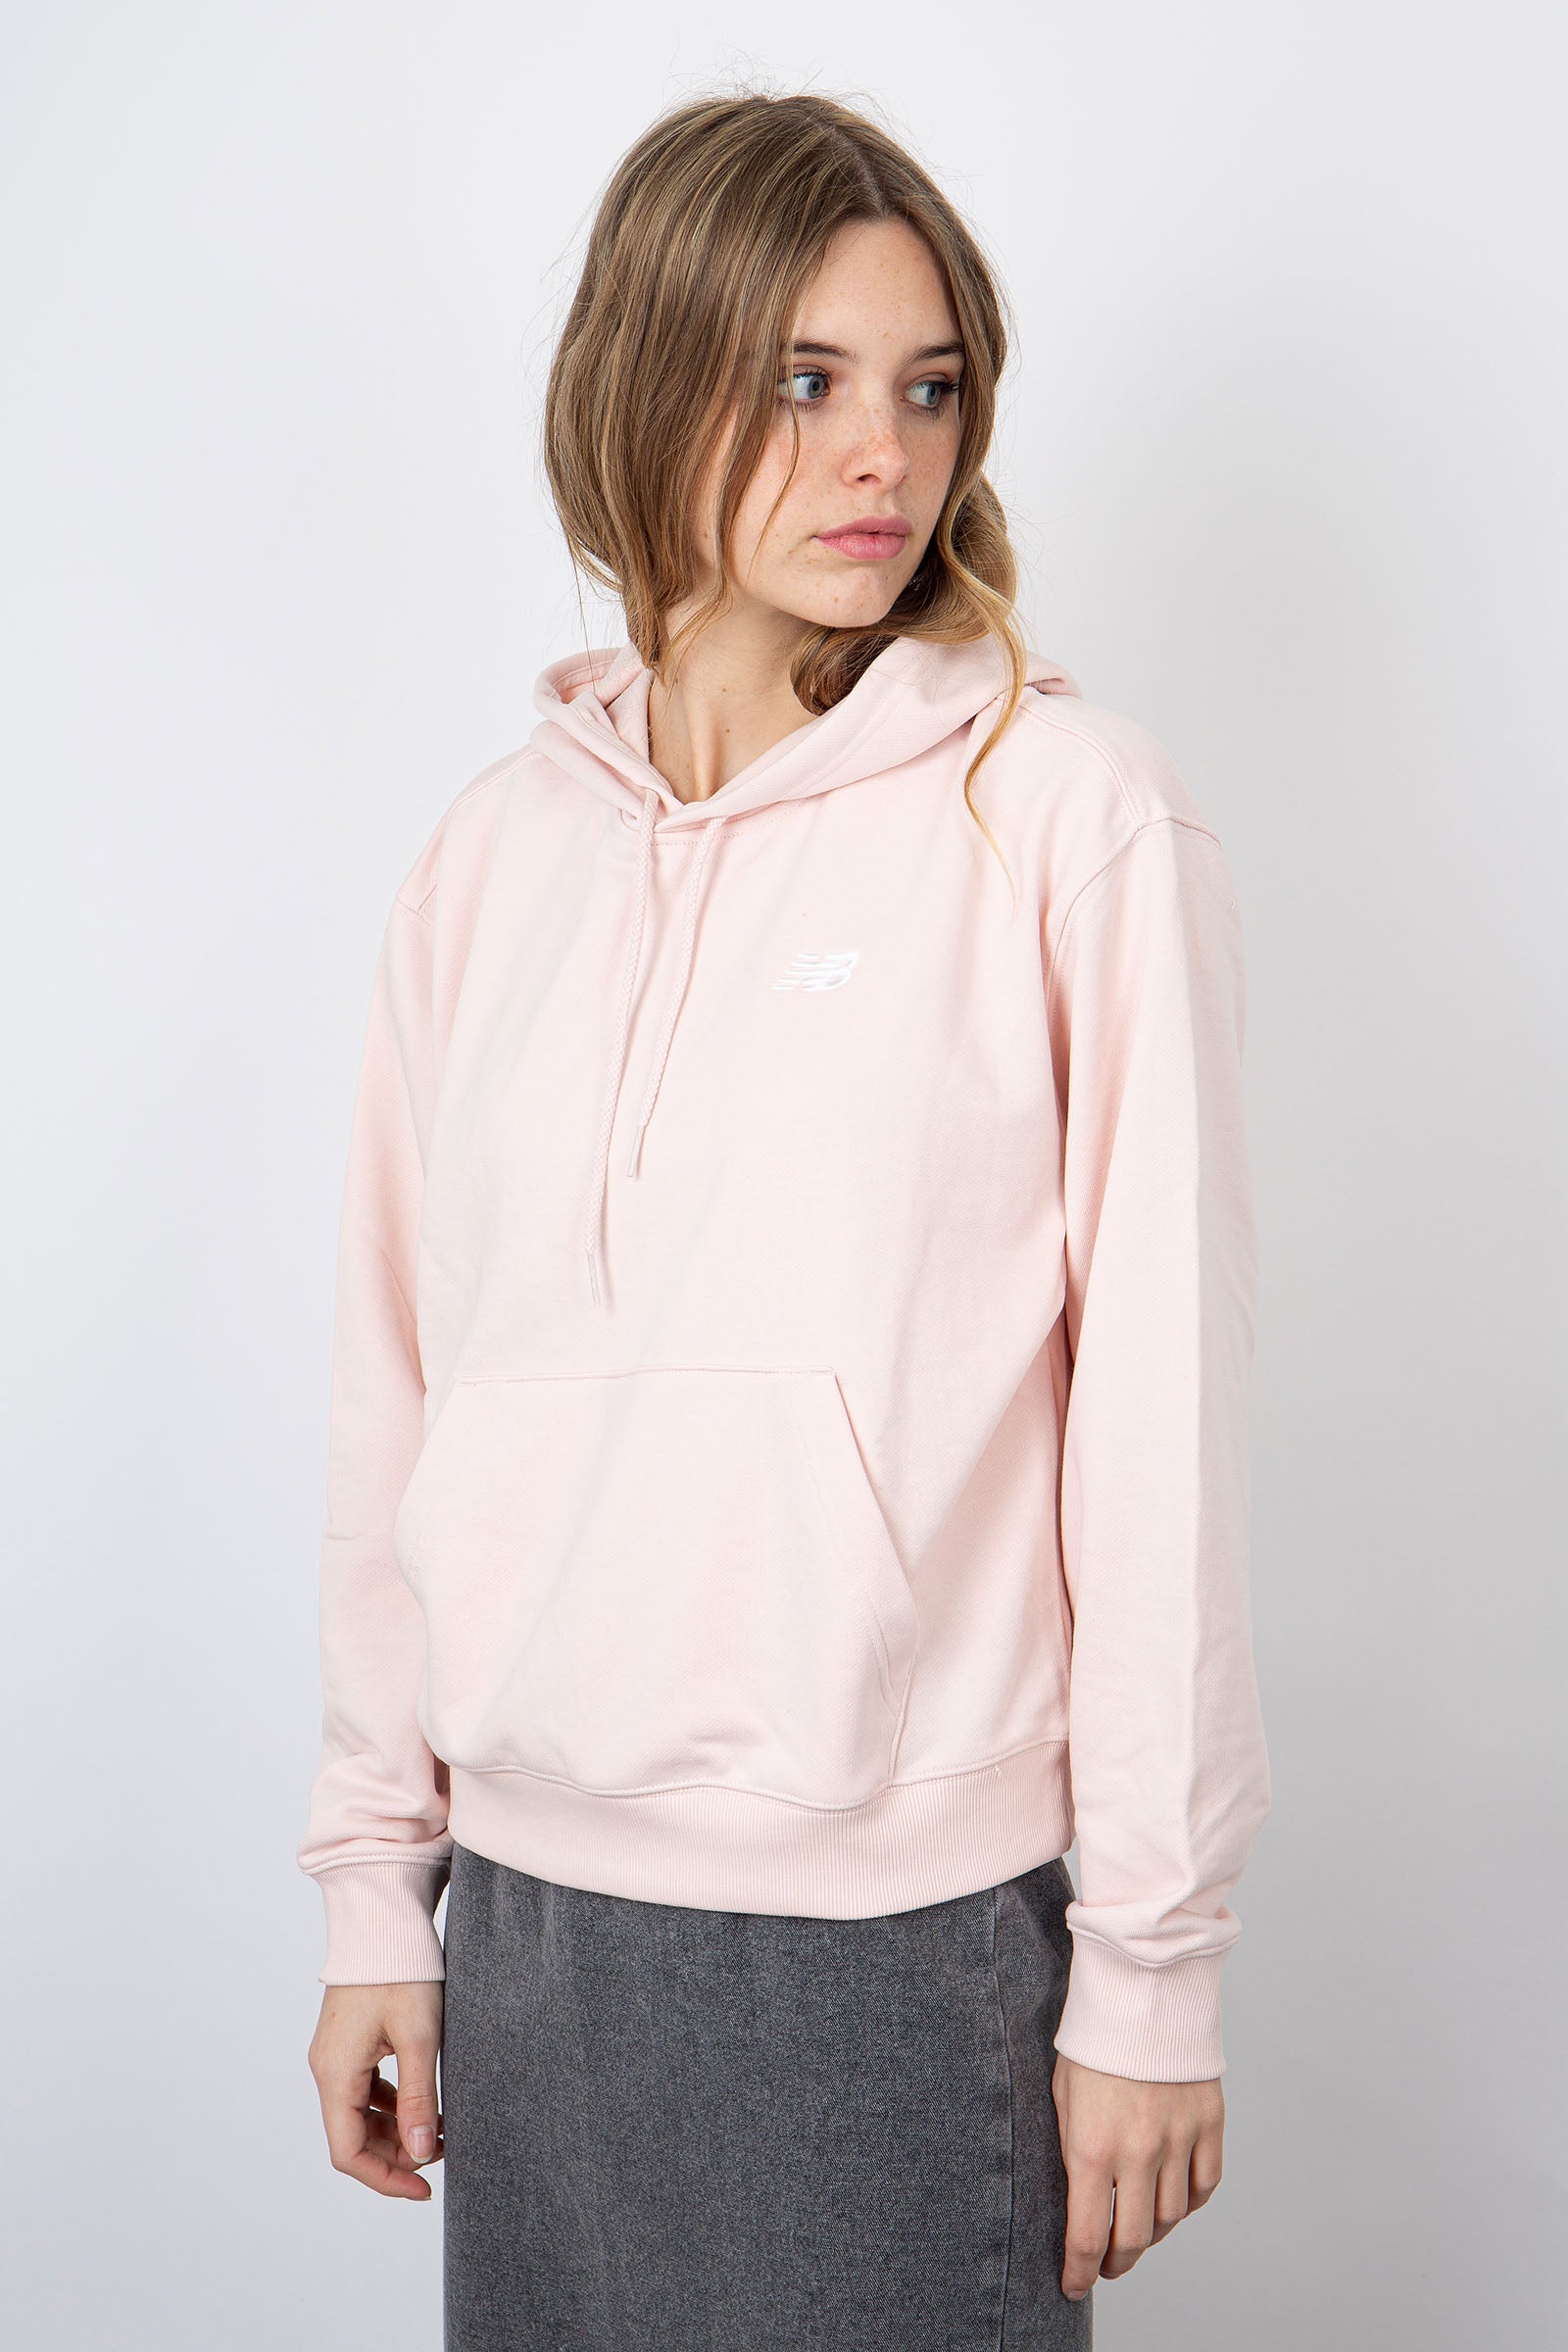 New Balance French Terry Hoodie with Small Logo in Light Pink Cotton - 3